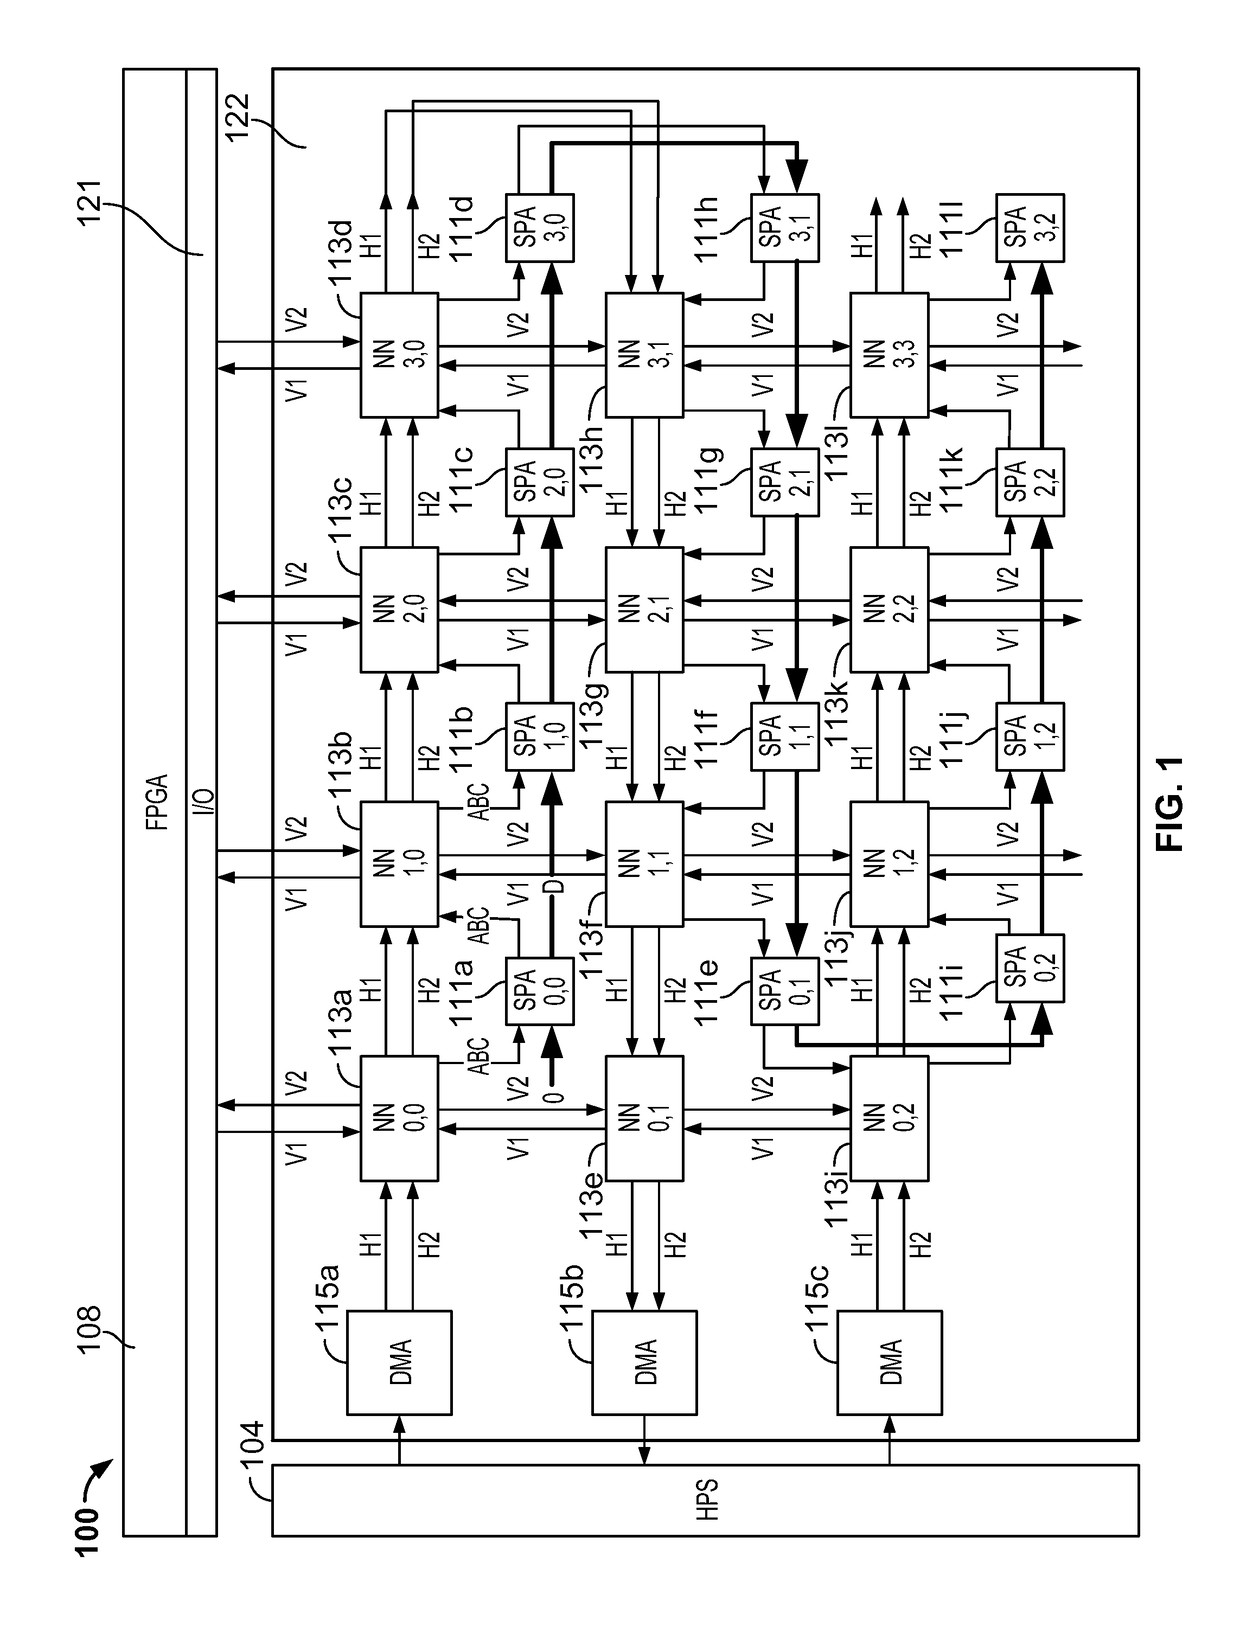 Hybrid architecture for signal processing and signal processing accelerator